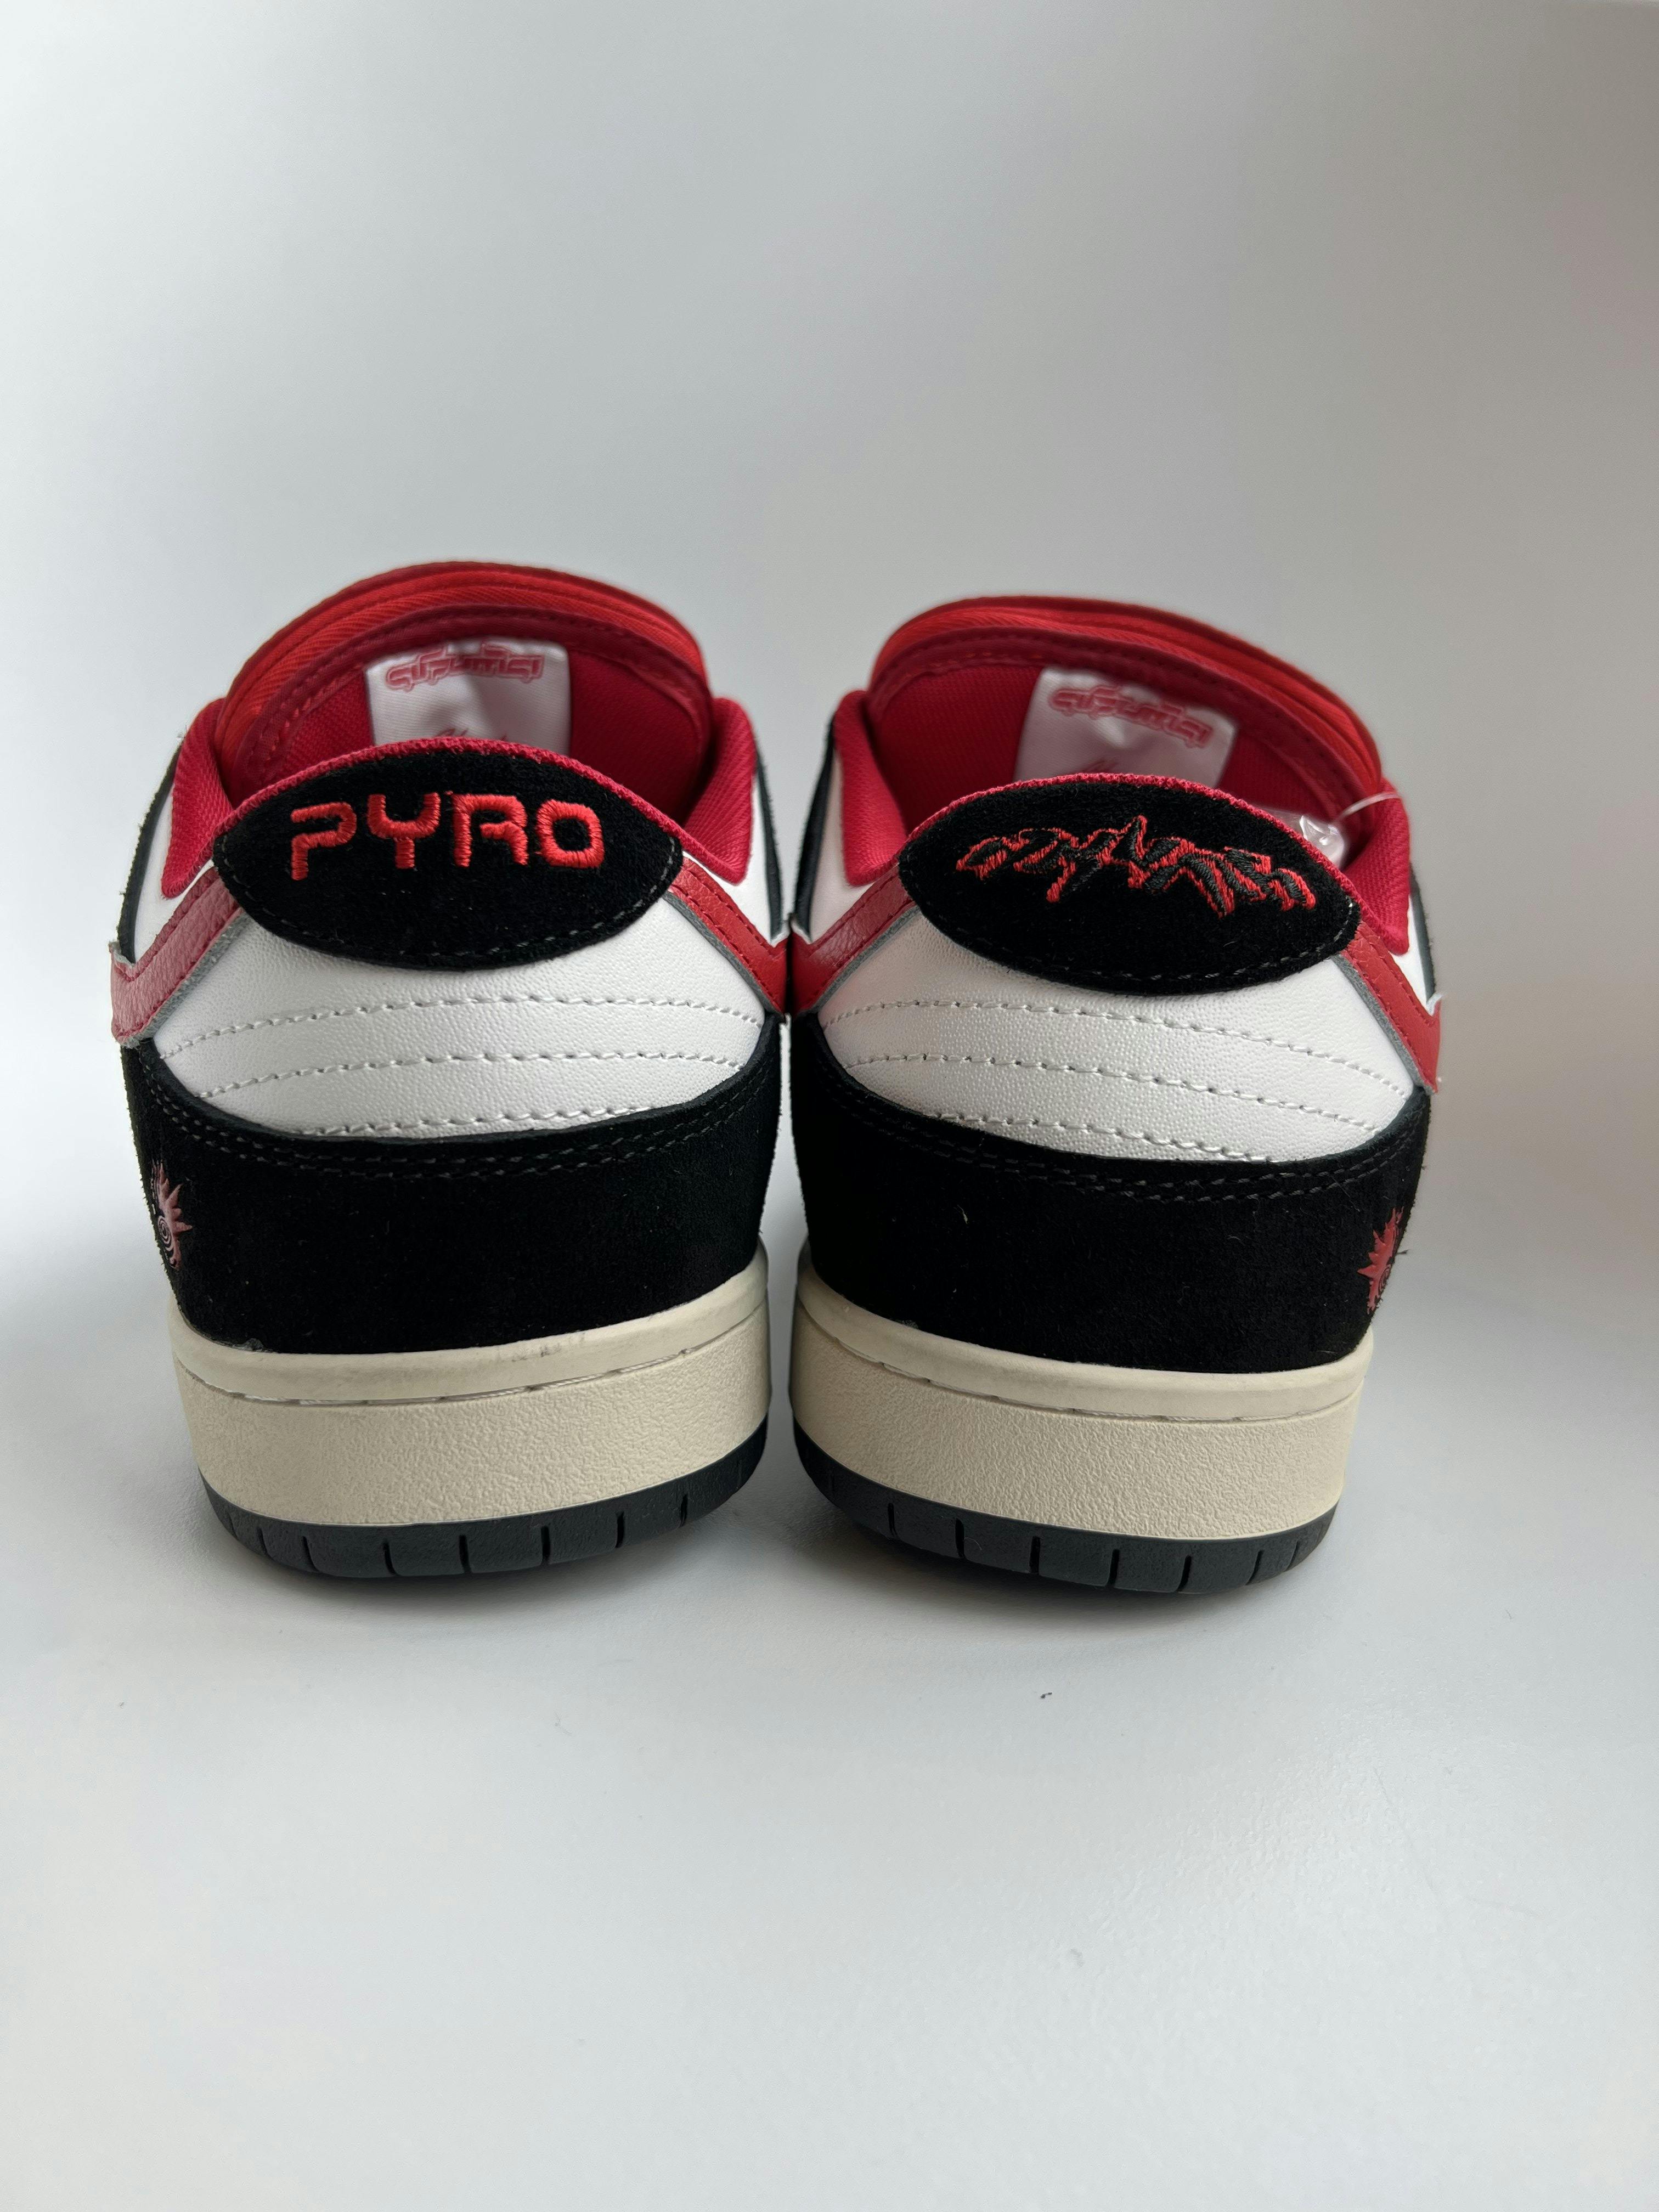 Pyro and Akuma embroidery on the heel tab of the sneakers